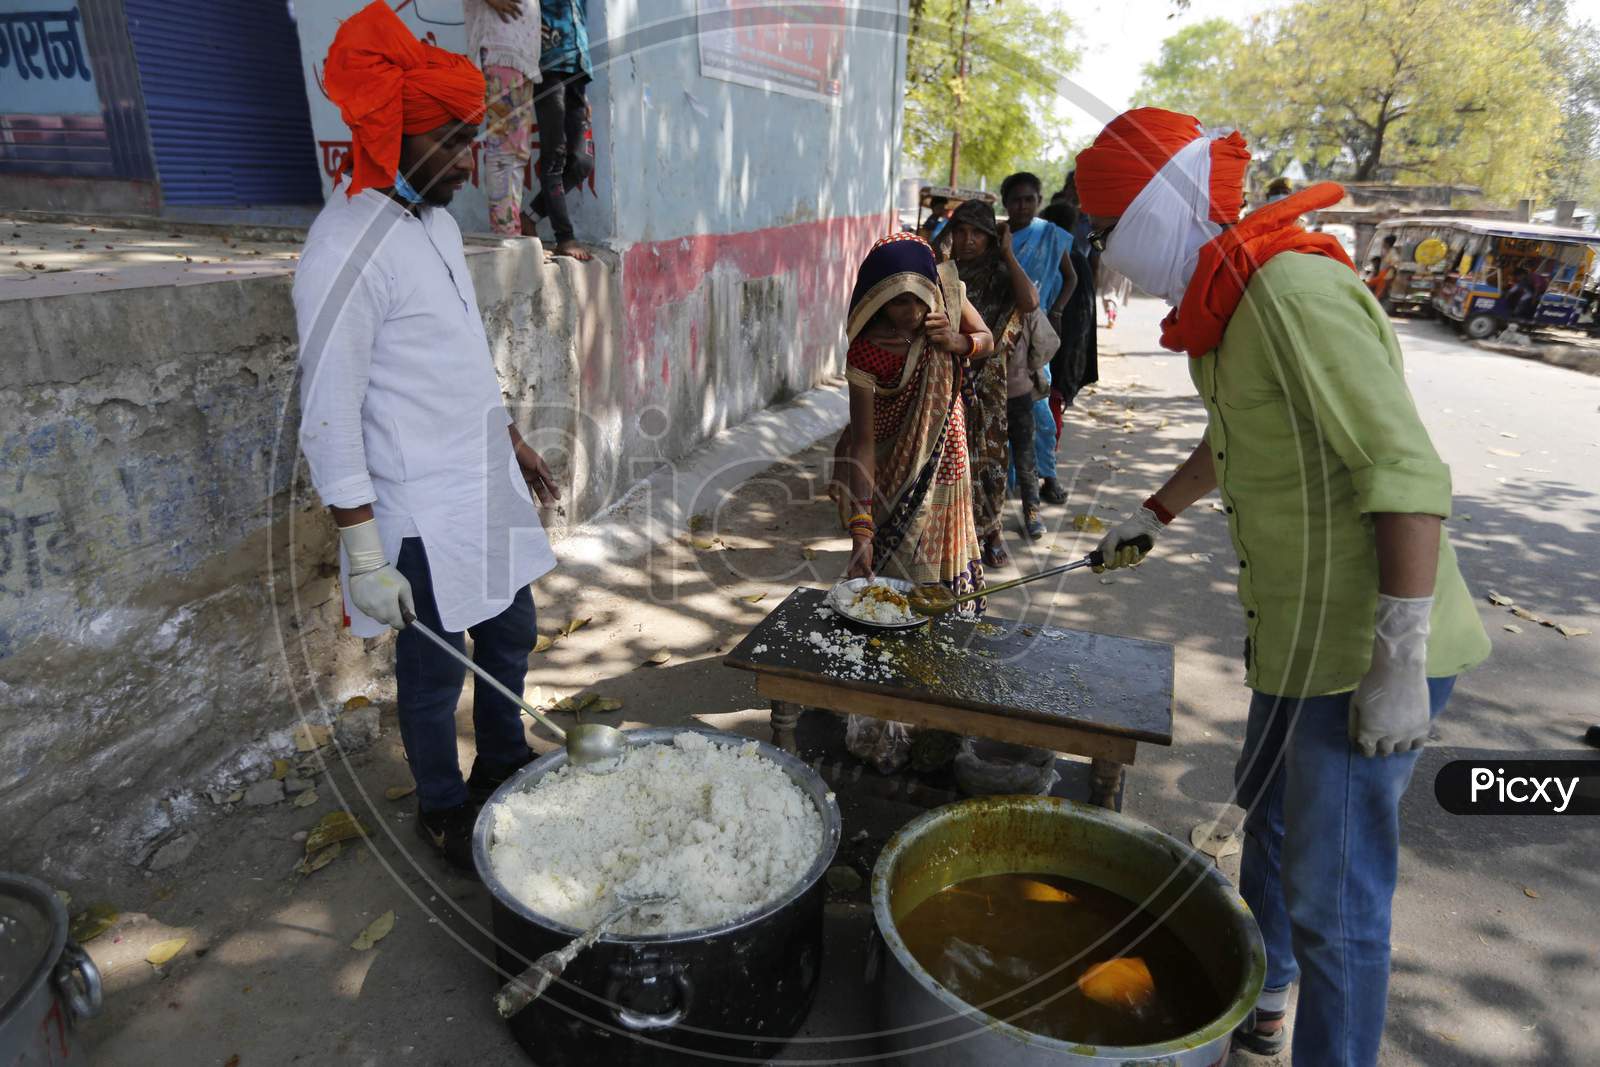 People Distributing Food for  Poor People During A 21-Day Nationwide Lockdown To Limit The Spreading Of Coronavirus Disease (Covid-19), Prayagraj, April 4, 2020.